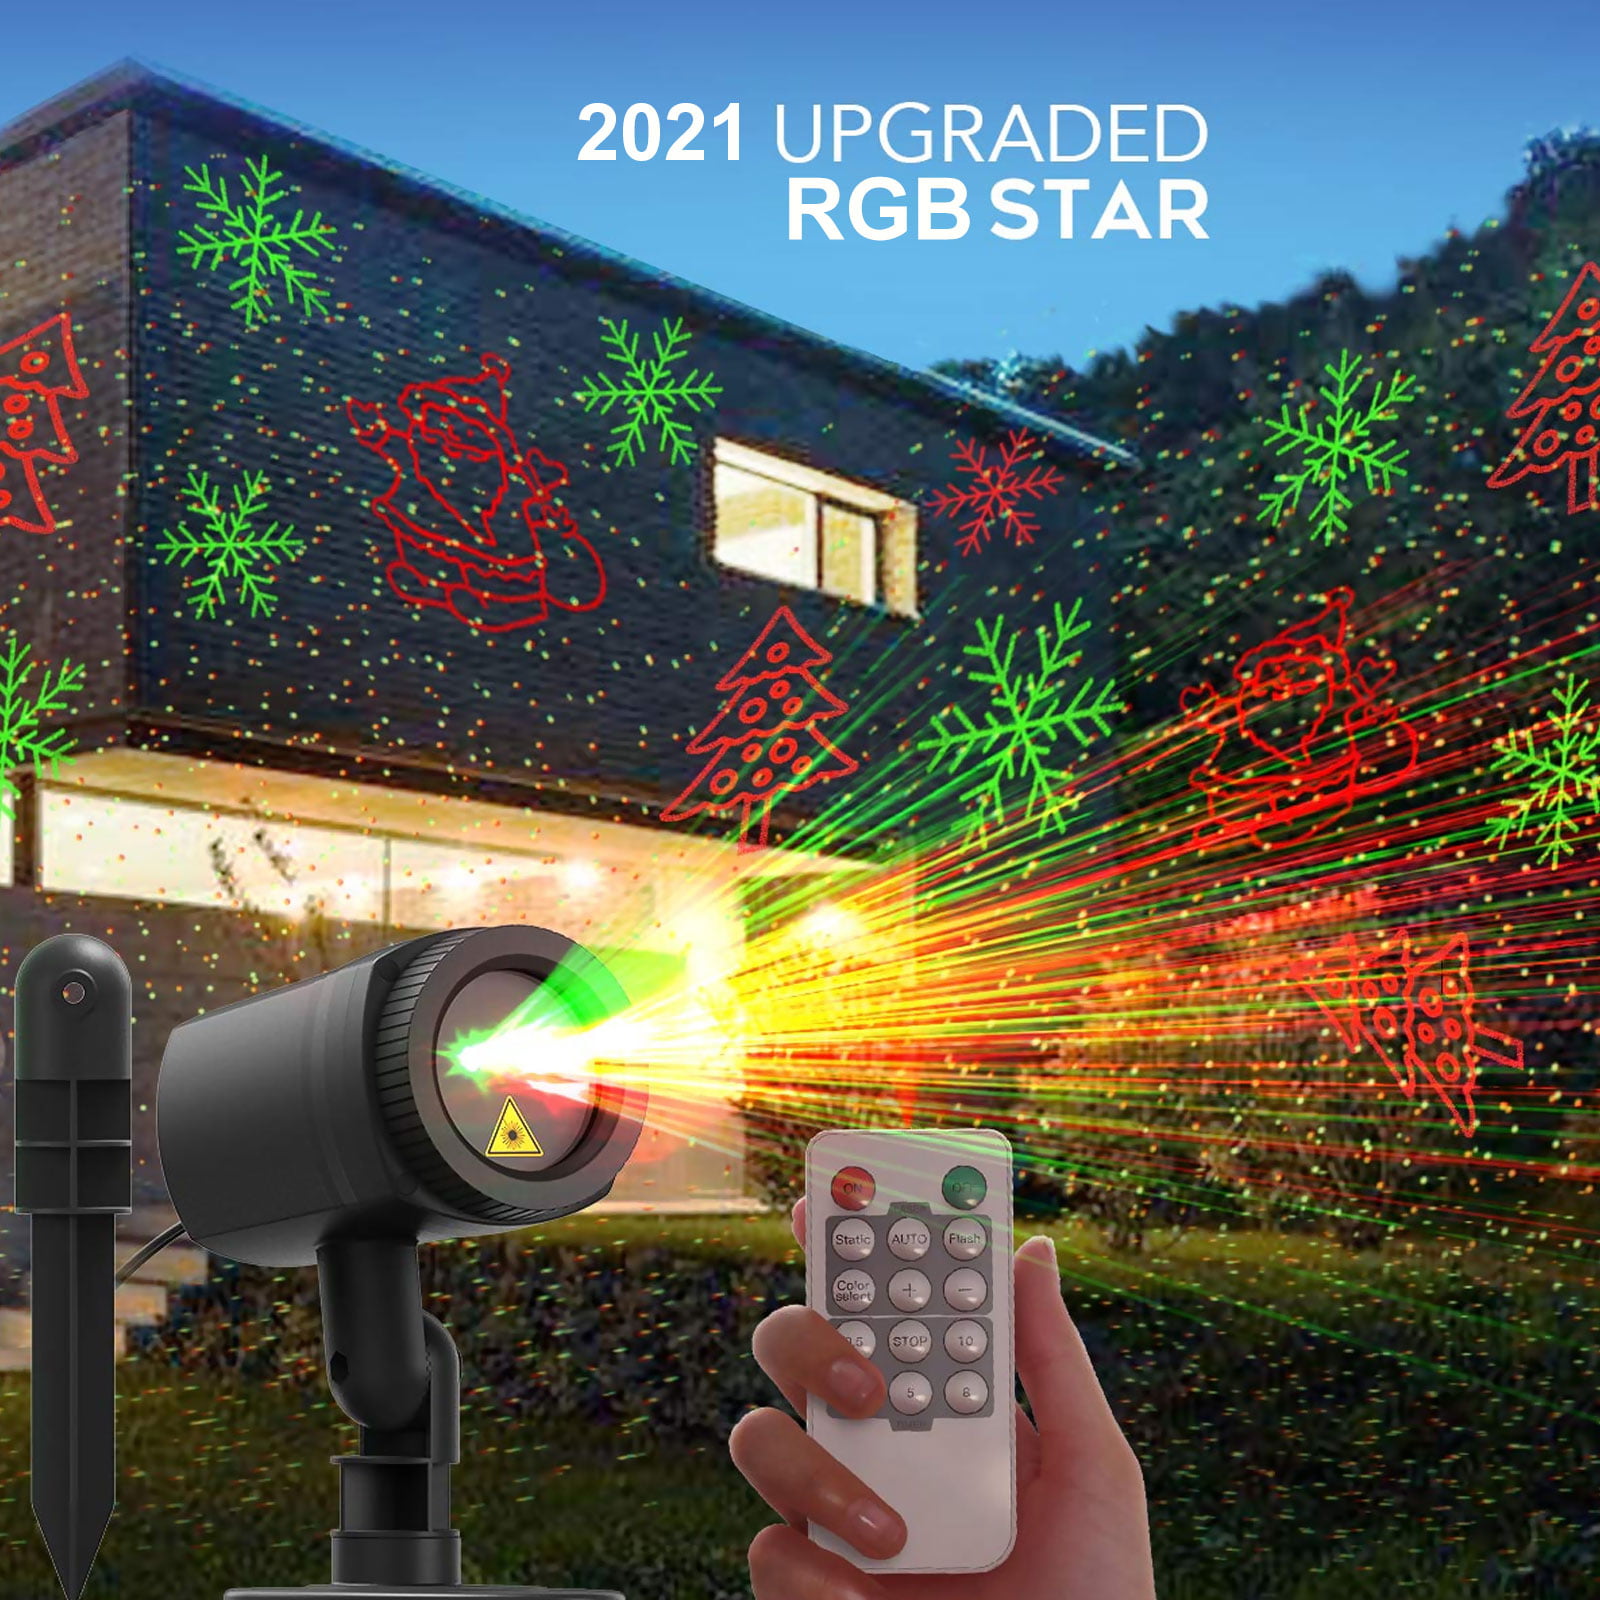 Waterproof Projector Lights LED Night Light Landscape Spotlight Romantic Red and Green Star Show with Remote Decorative for Bedroom Outdoor Garden Patio Wall Holiday Party